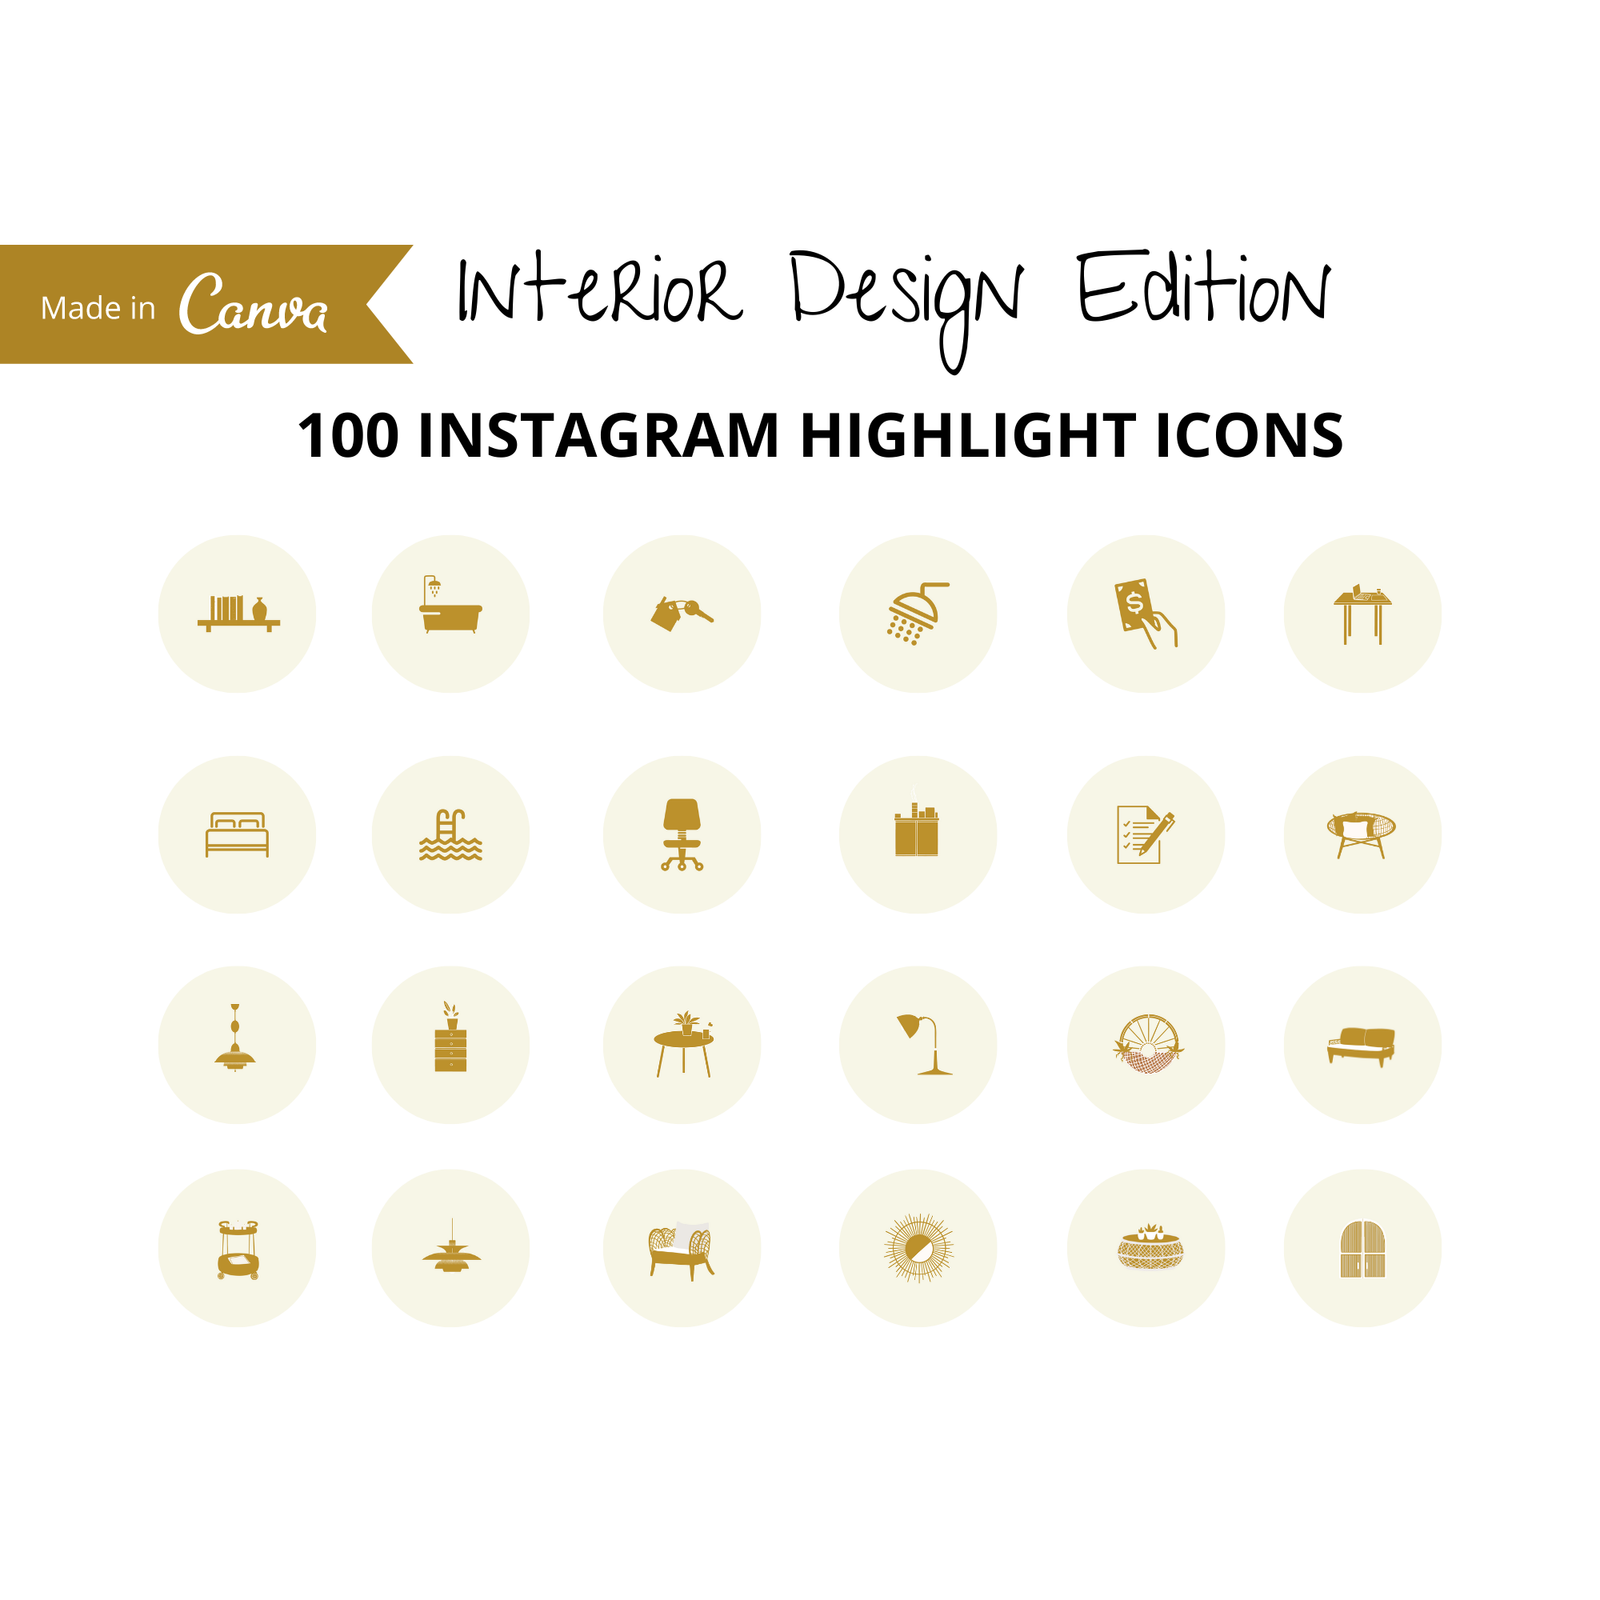 Interior design Instagram Highlight Icons - 100 Icons Made in Canva